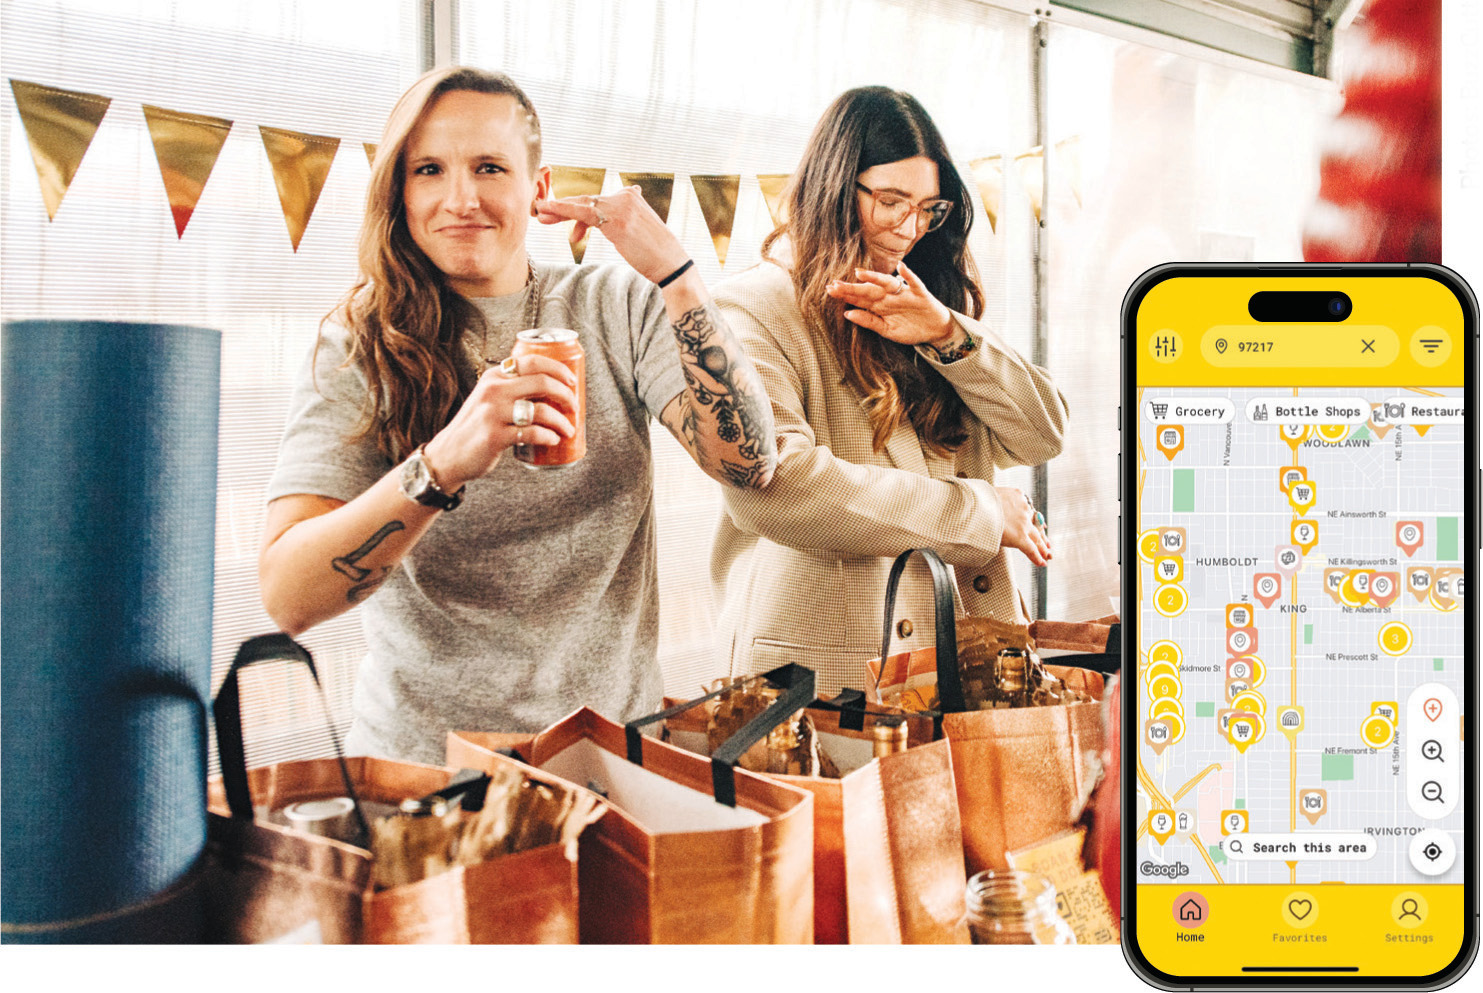 Sarah (left) and Olivia Sears are the minds behind BuzzCutt, an app that helps users discover bars, bottle shops, grocery stores and more catering to the nonalcoholic lifestyle.